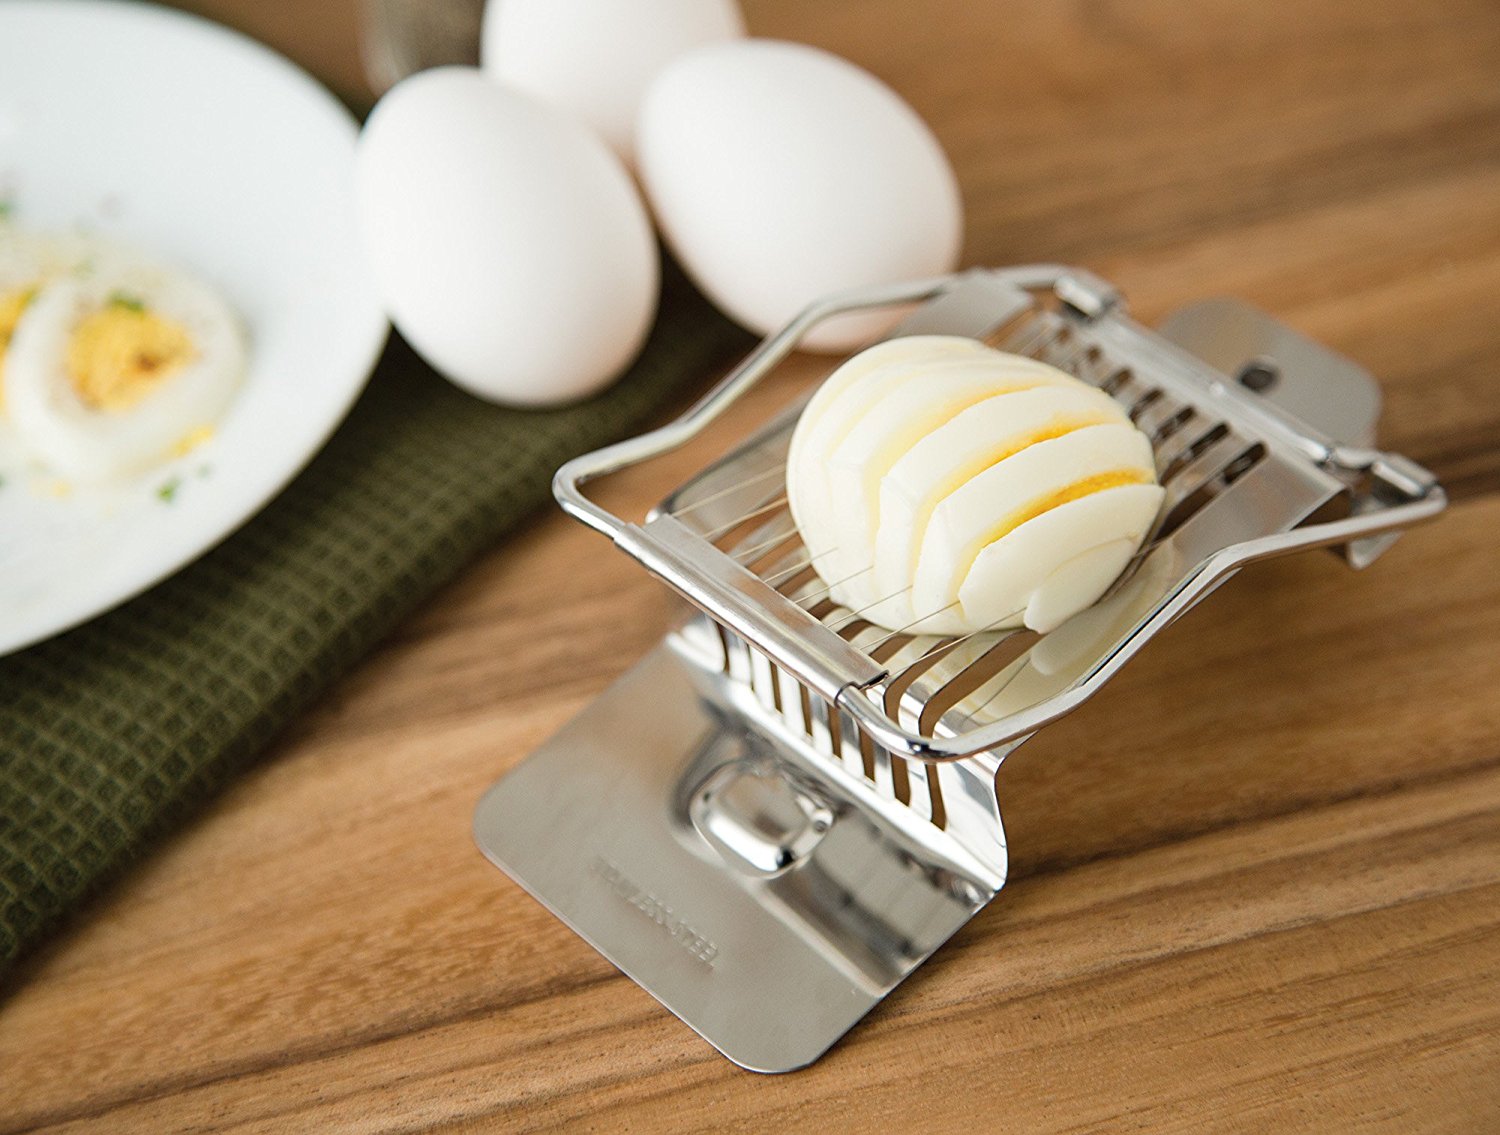 Egg Slicer Gifts and Gadgets, CANADA